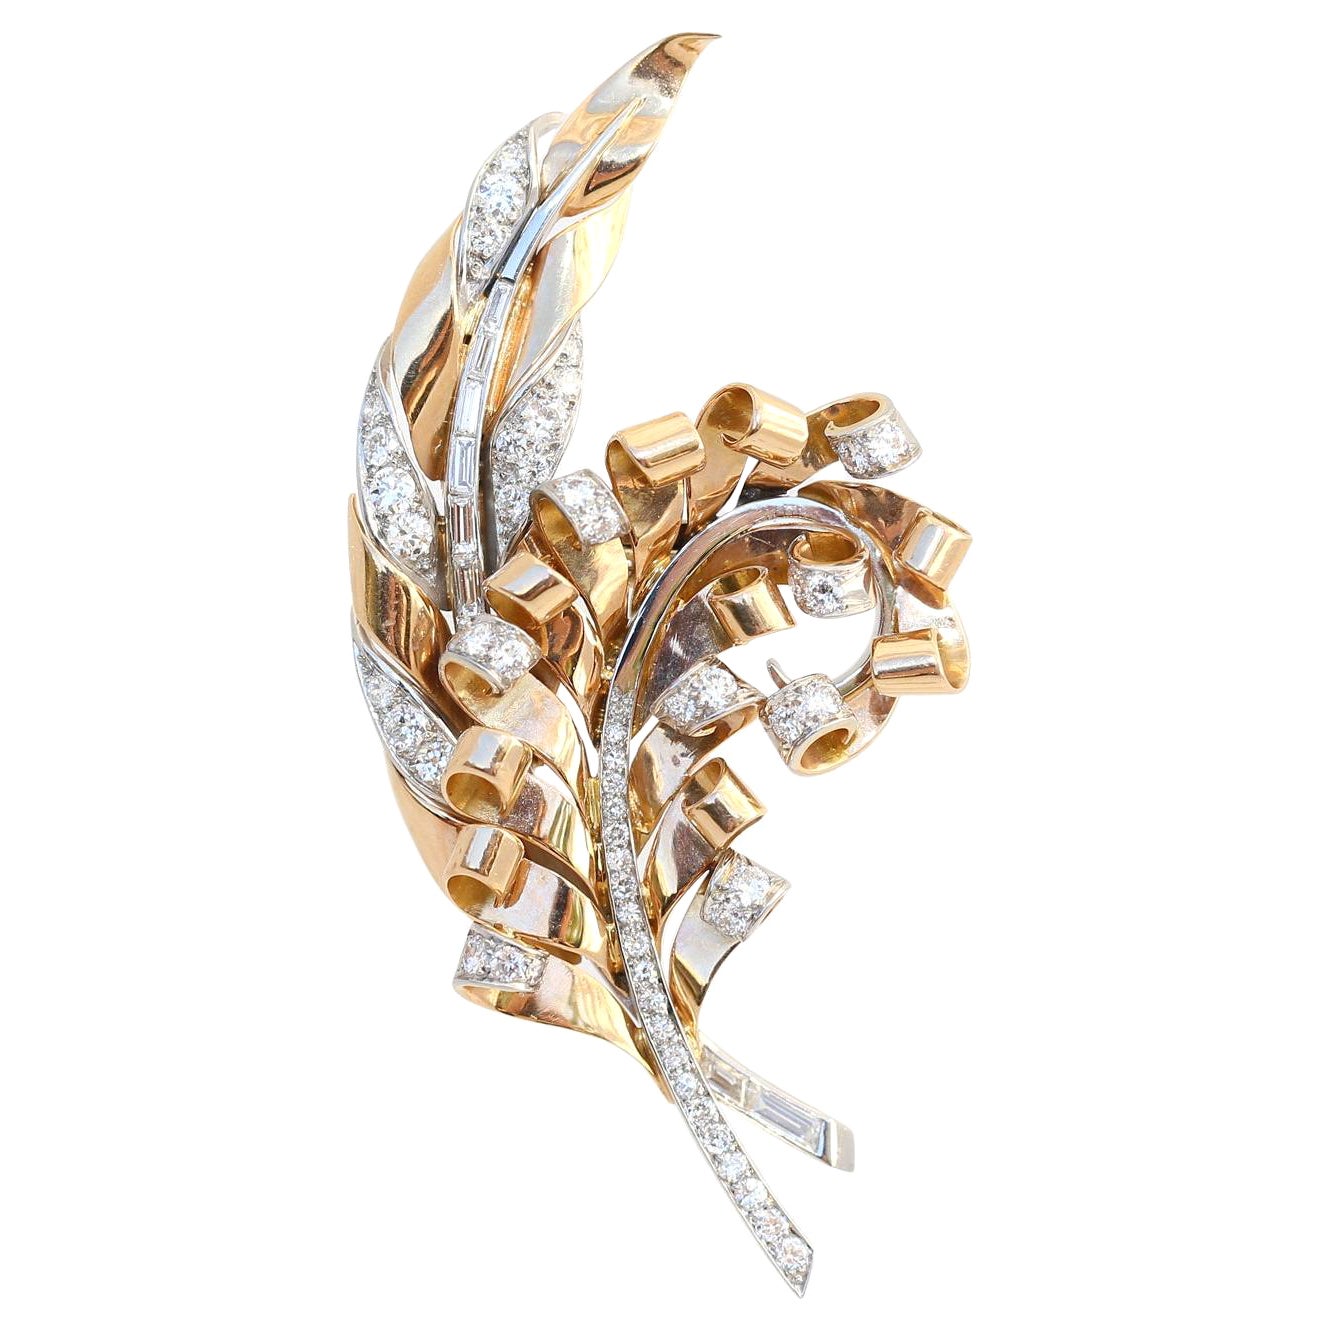 Swiss Brooch Diamonds Platinum Yellow Gold Gubelin, 1950. Beautiful and elegant piece, created in Zurich Switzerland by the famous jewelry house of Gubelin during the post-war period, in the 1950es. Depicting a two-tone wheat spica. An ancient